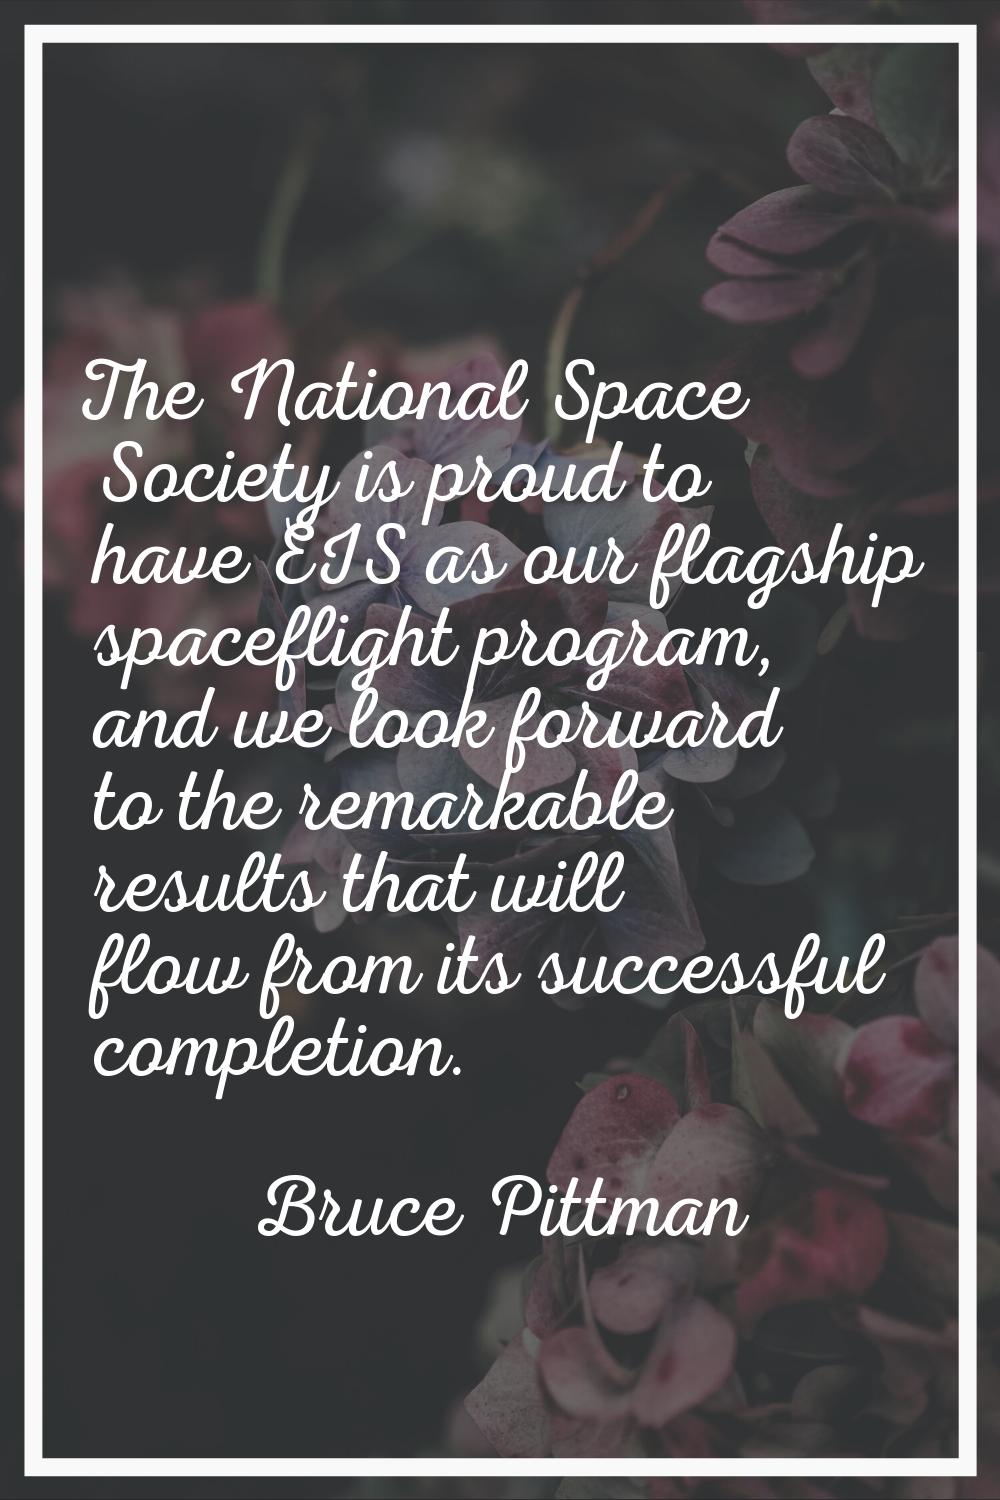 The National Space Society is proud to have EIS as our flagship spaceflight program, and we look fo